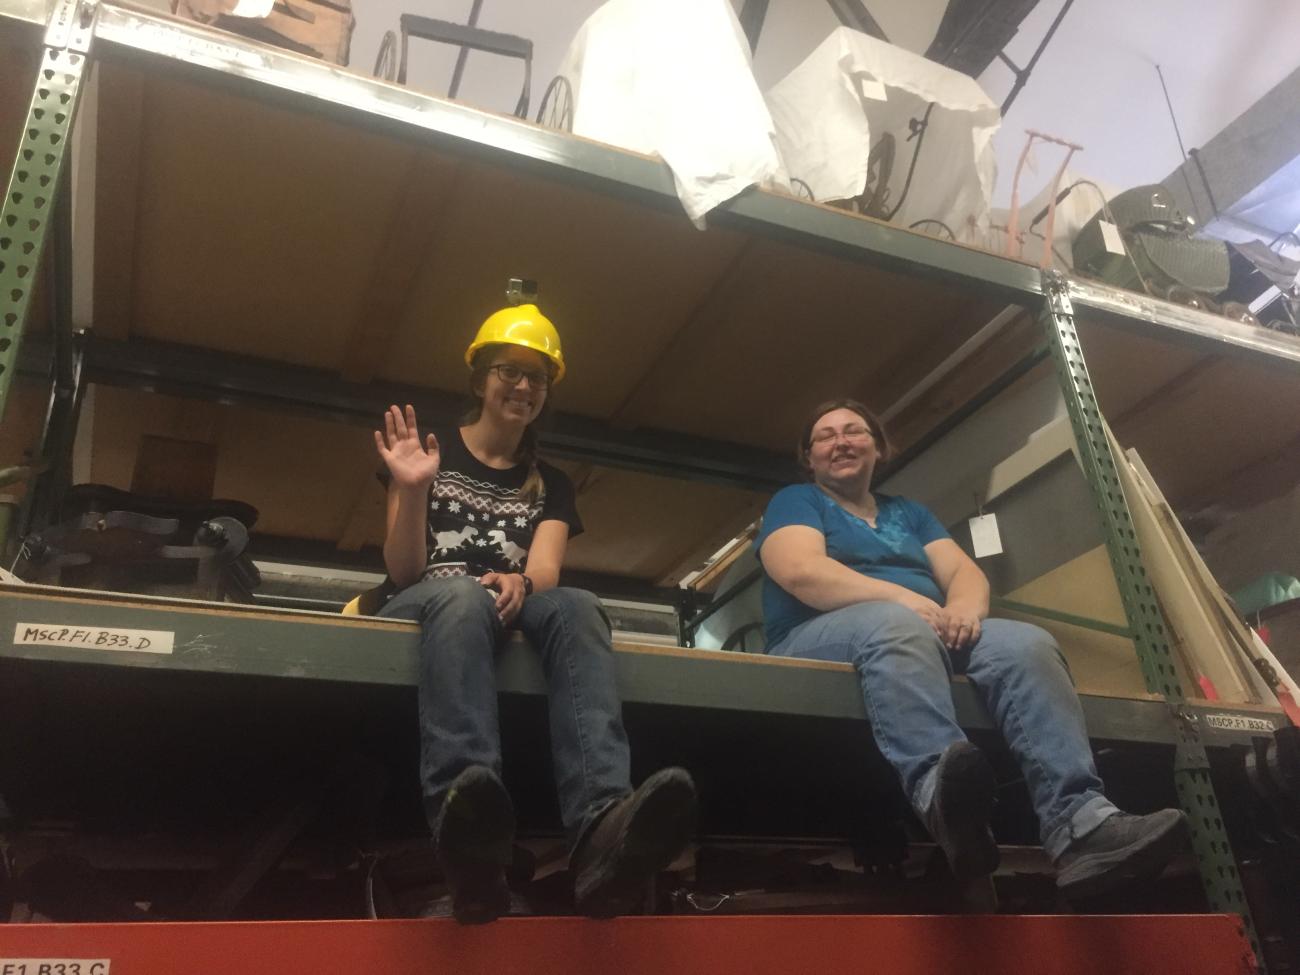 Melissa de Bie and another History Colorado employee sit on shelves in a warehouse they were emptying. They are staring in the camera with friendly smiles.